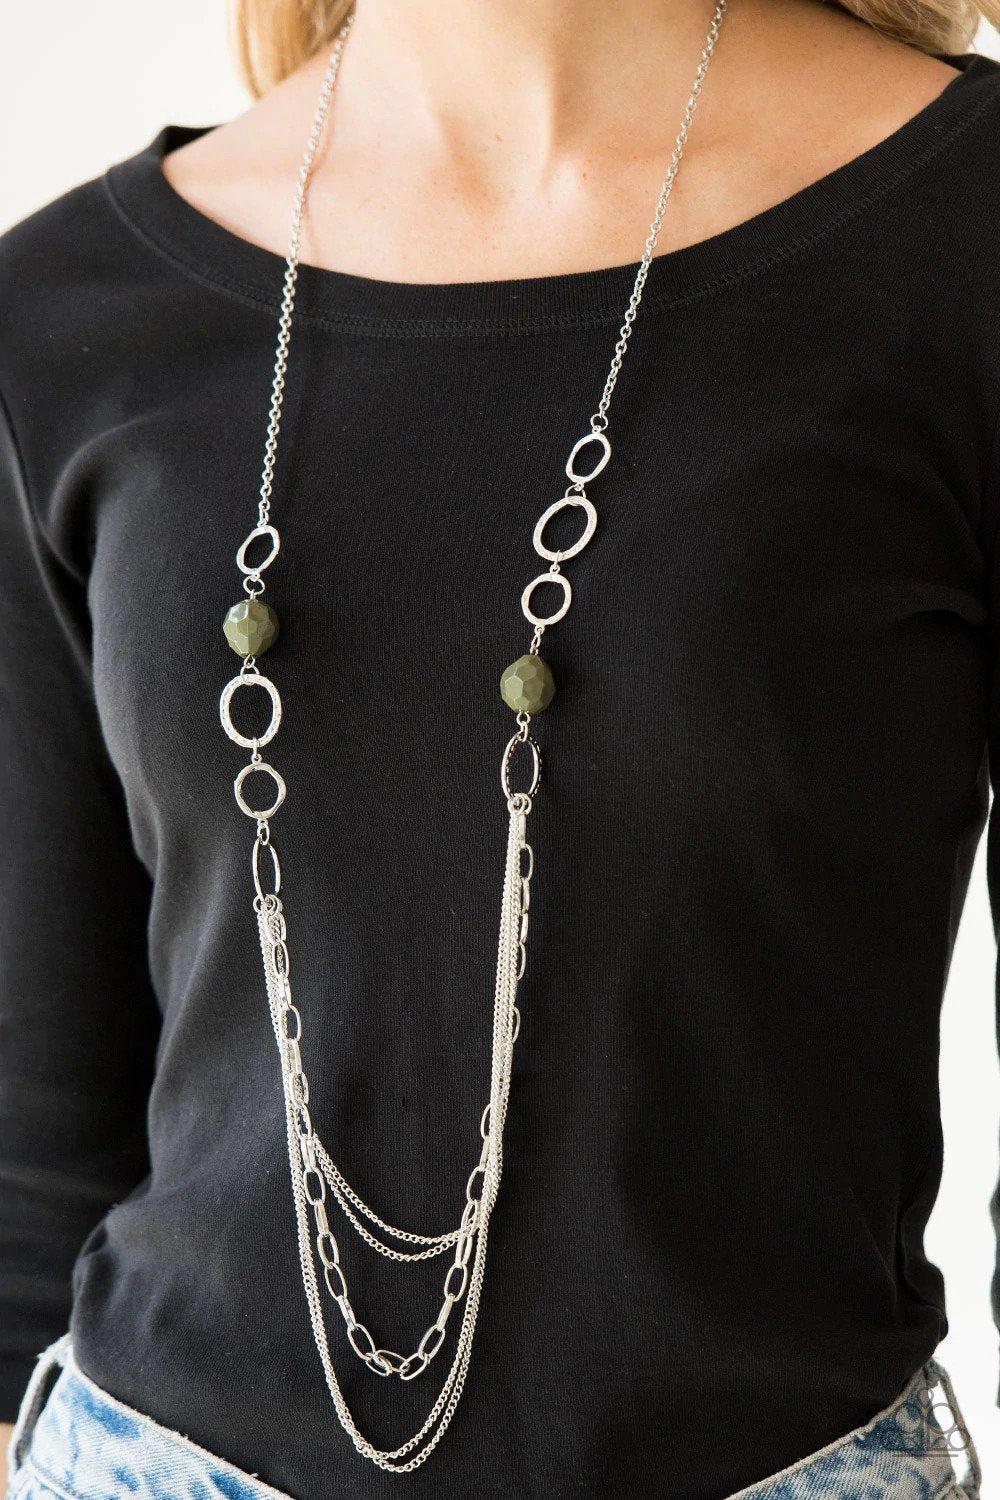 Margarita Masquerades Green Necklaces - Paparazzi Accessories- on model - CarasShop.com - $5 Jewelry by Cara Jewels